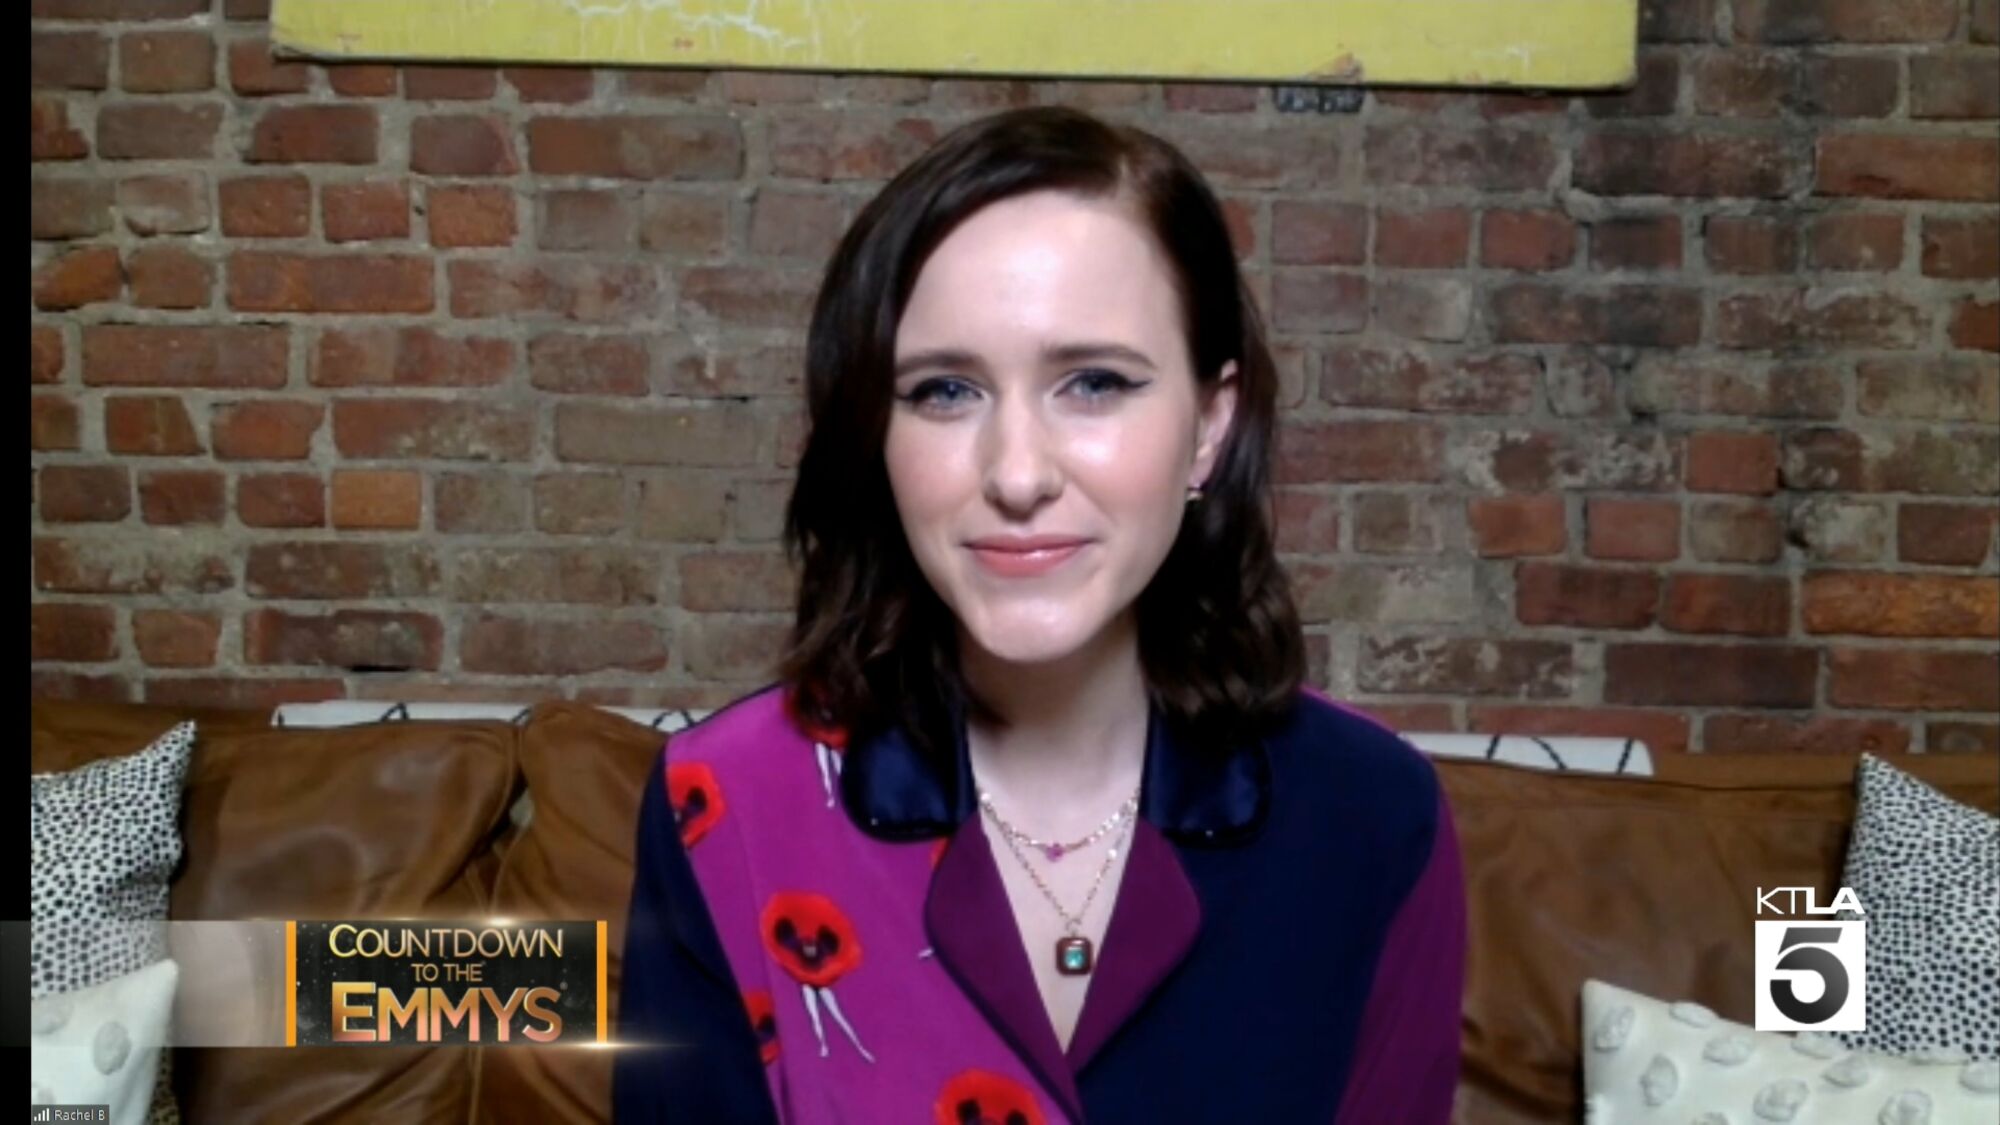 Rachel Brosnahan appears in "Countdown to the Emmys"